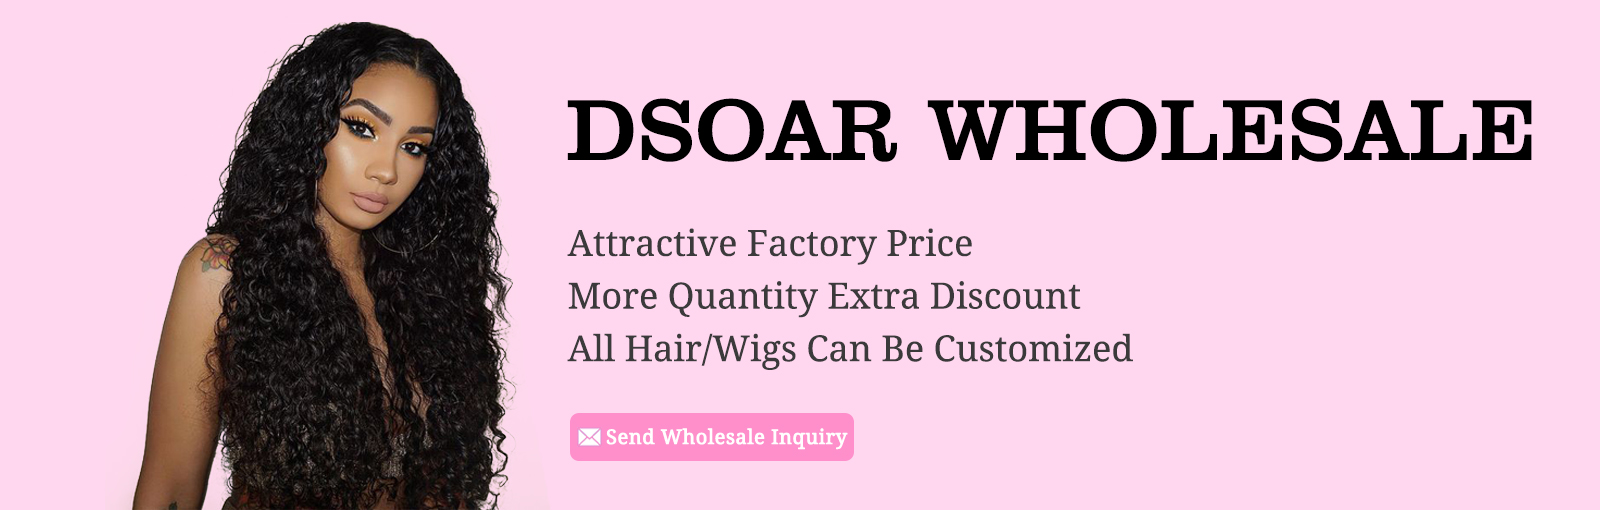 dsoar coupon code